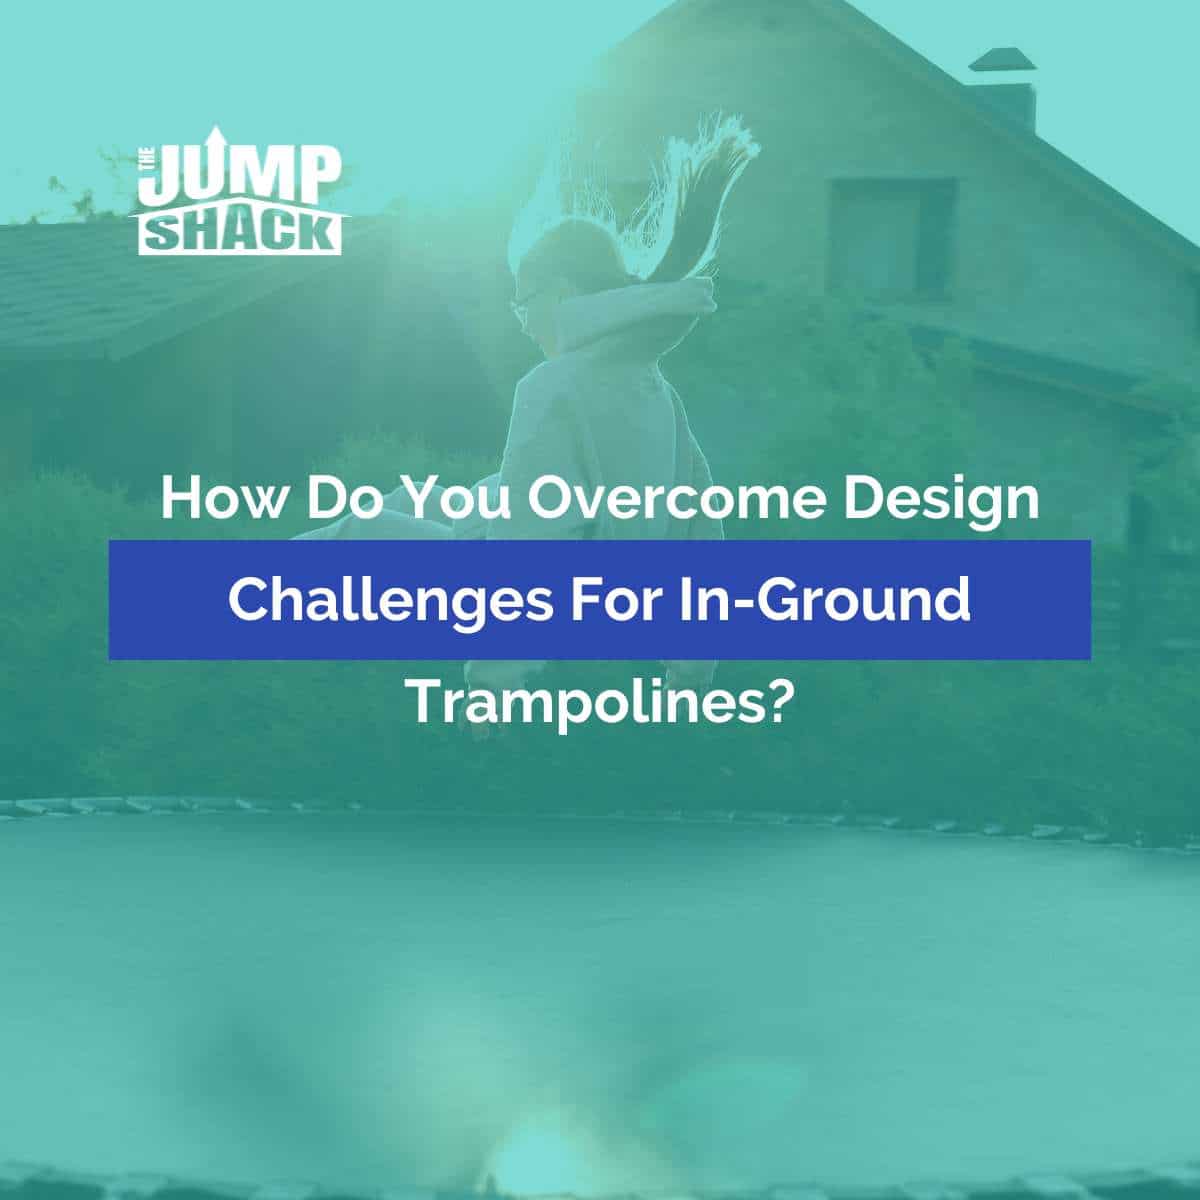 How Do You Overcome Design Challenges for In-Ground Trampolines?